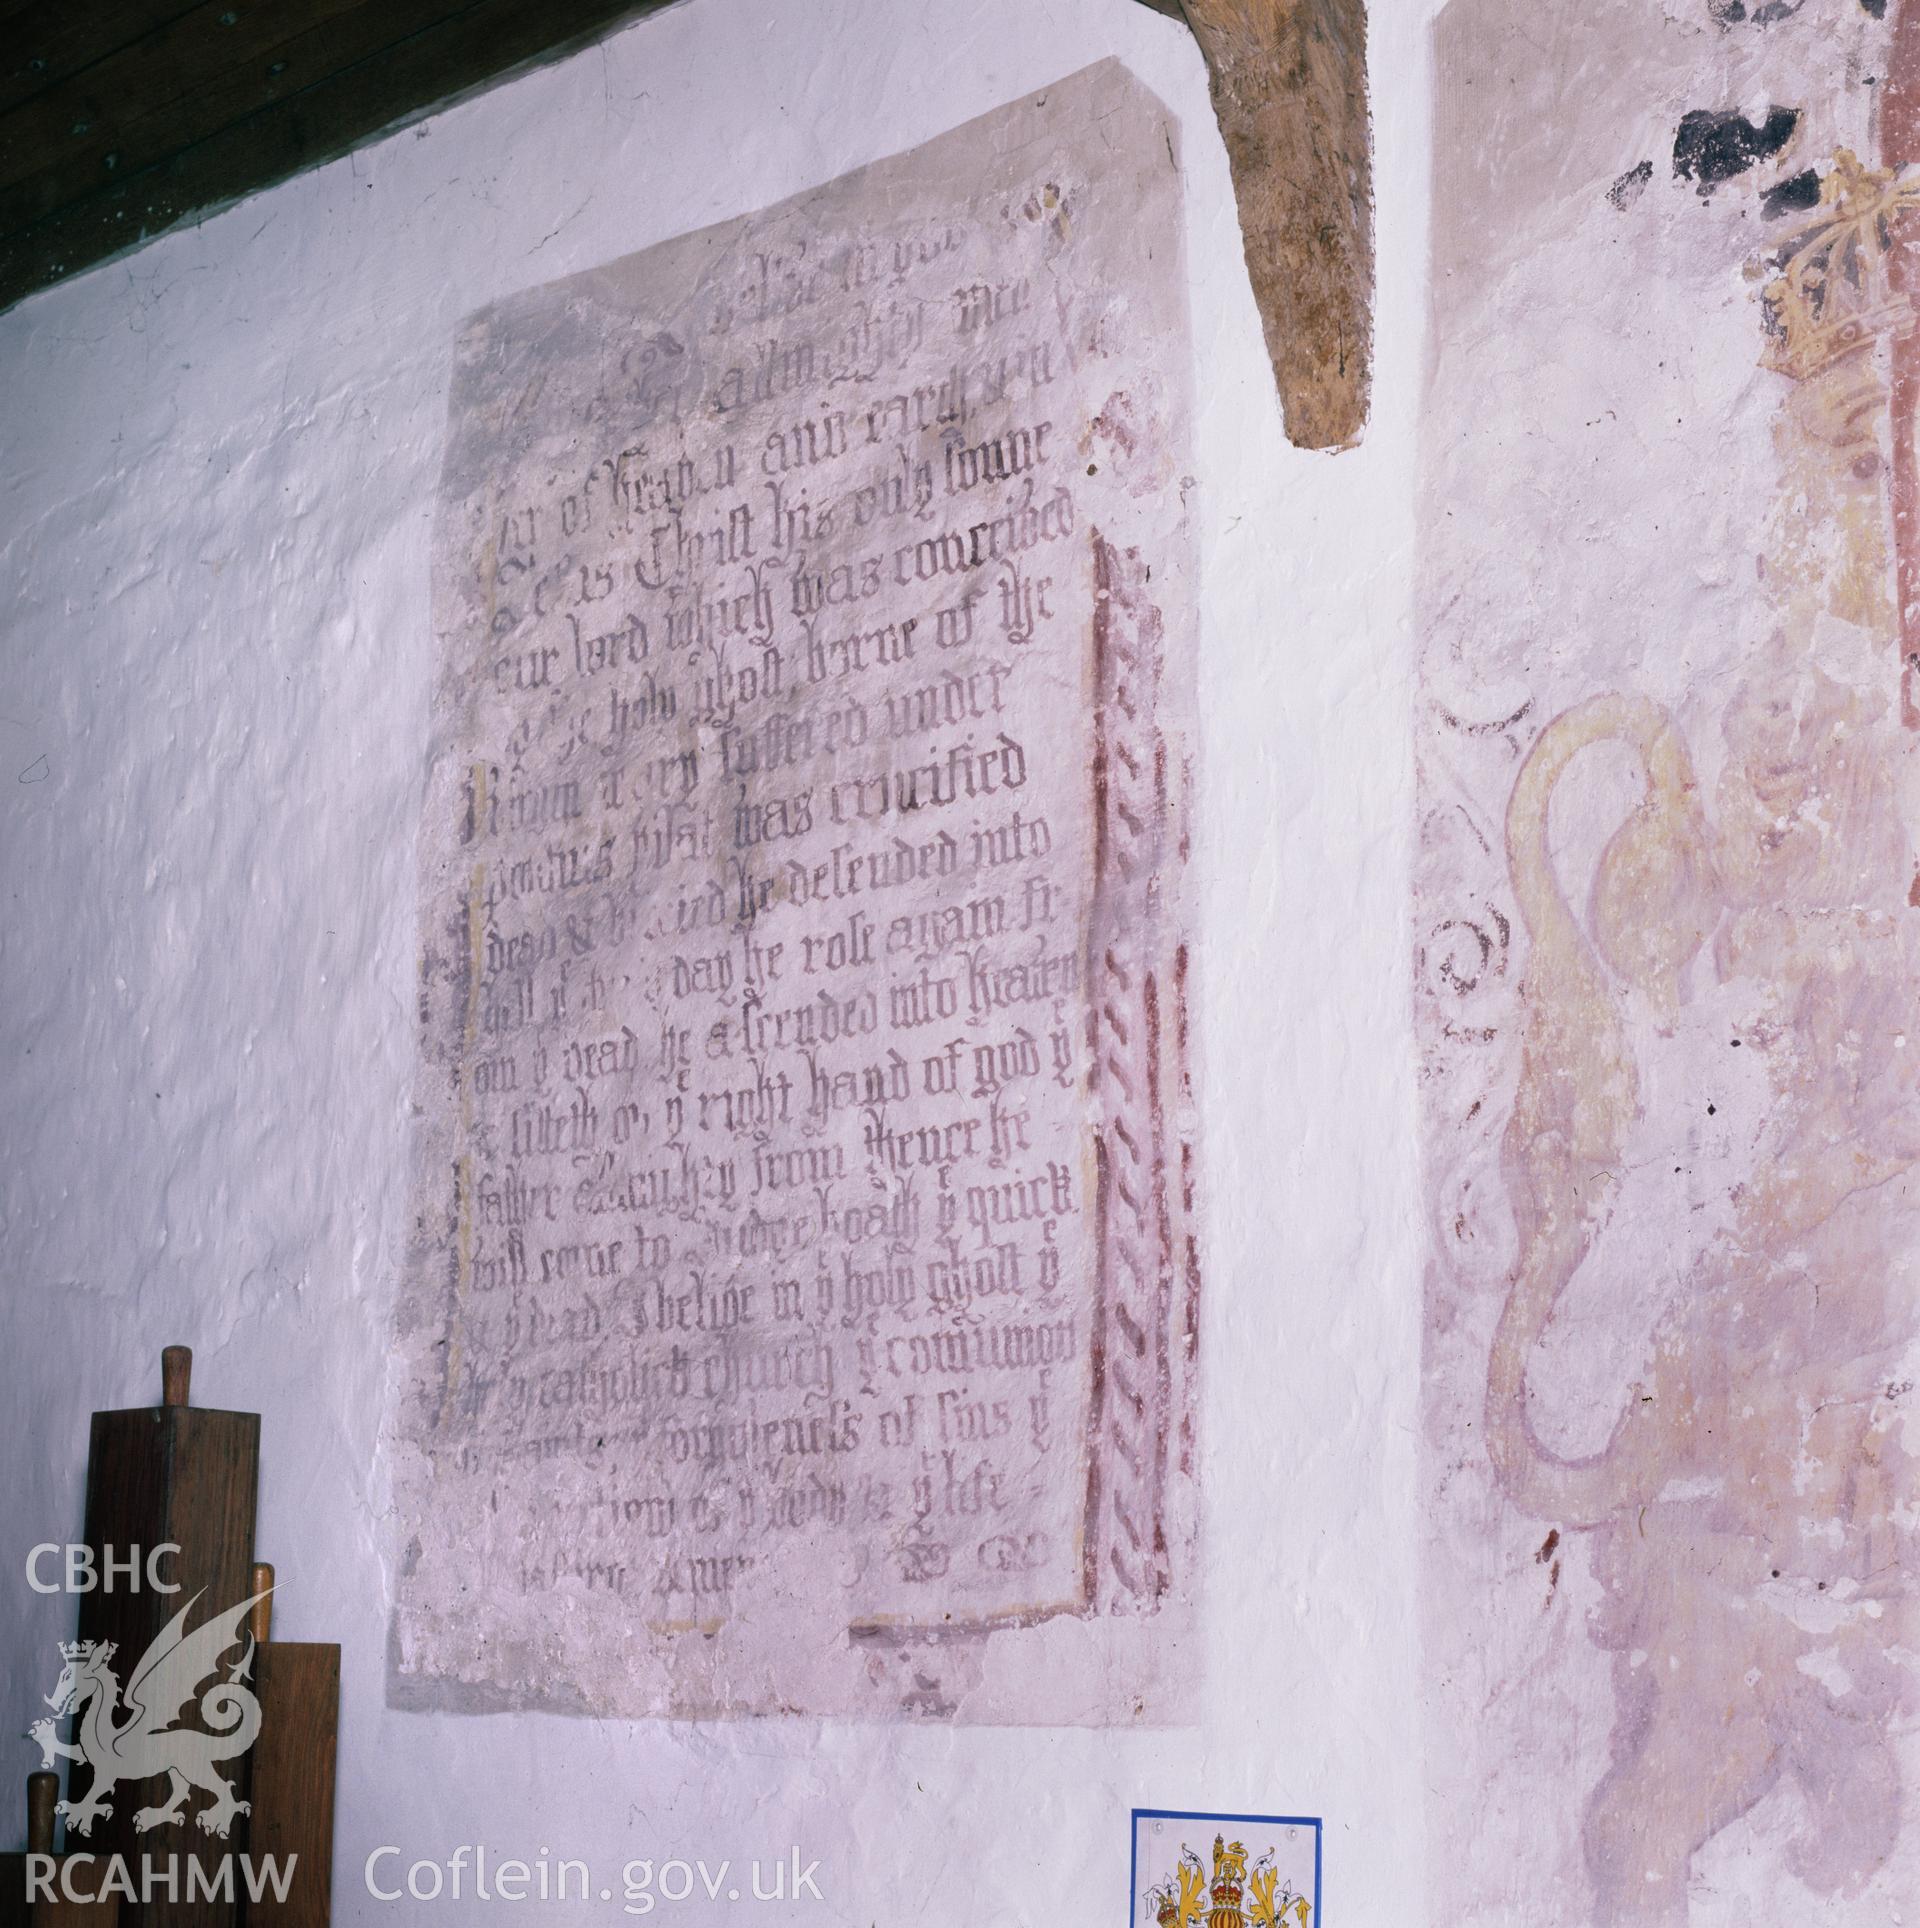 RCAHMW colour transparency showing wallpainting at Eglwys Brewis Church, taken by Iain Wright, 2003